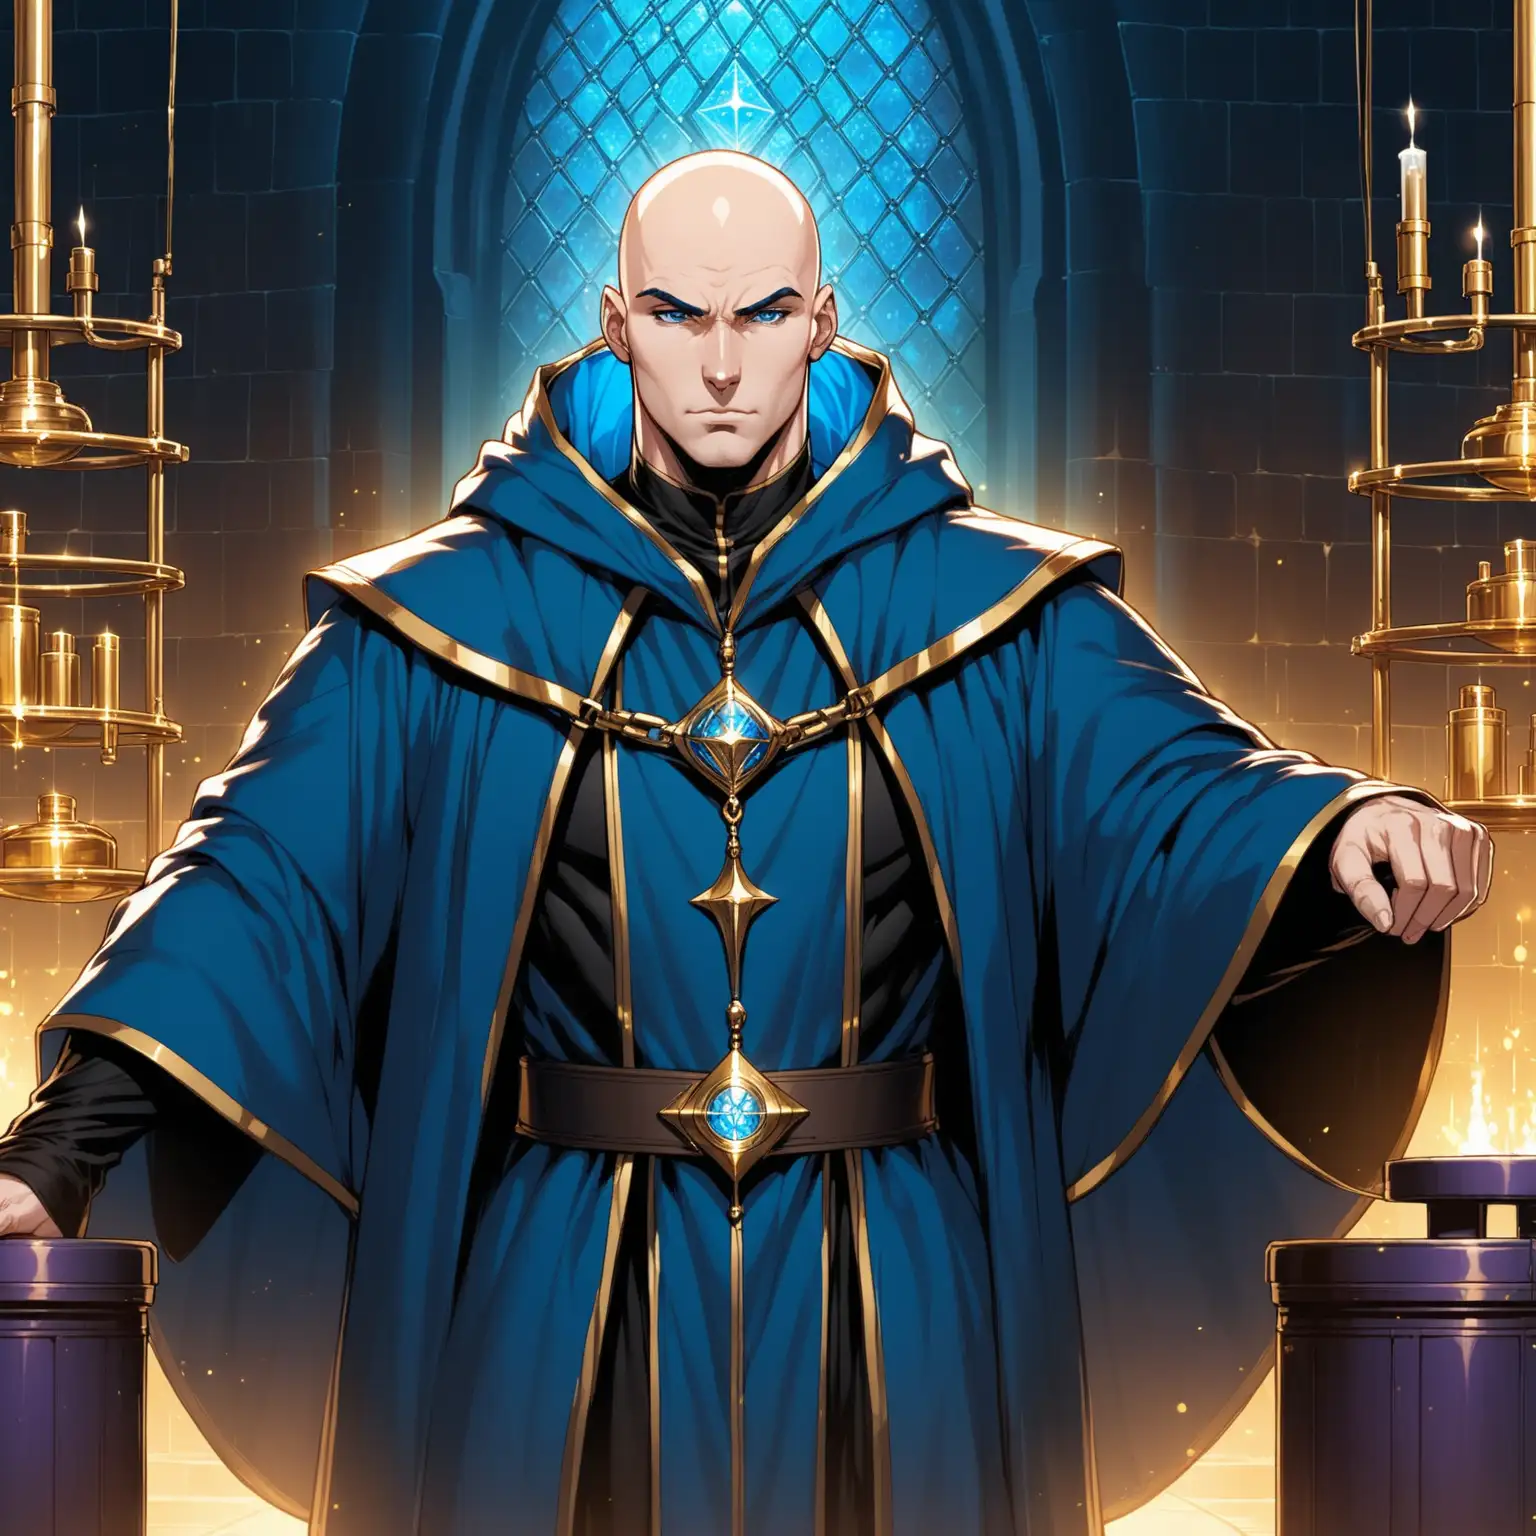 Serious Bald Wizard in Blue Robes in Laboratory